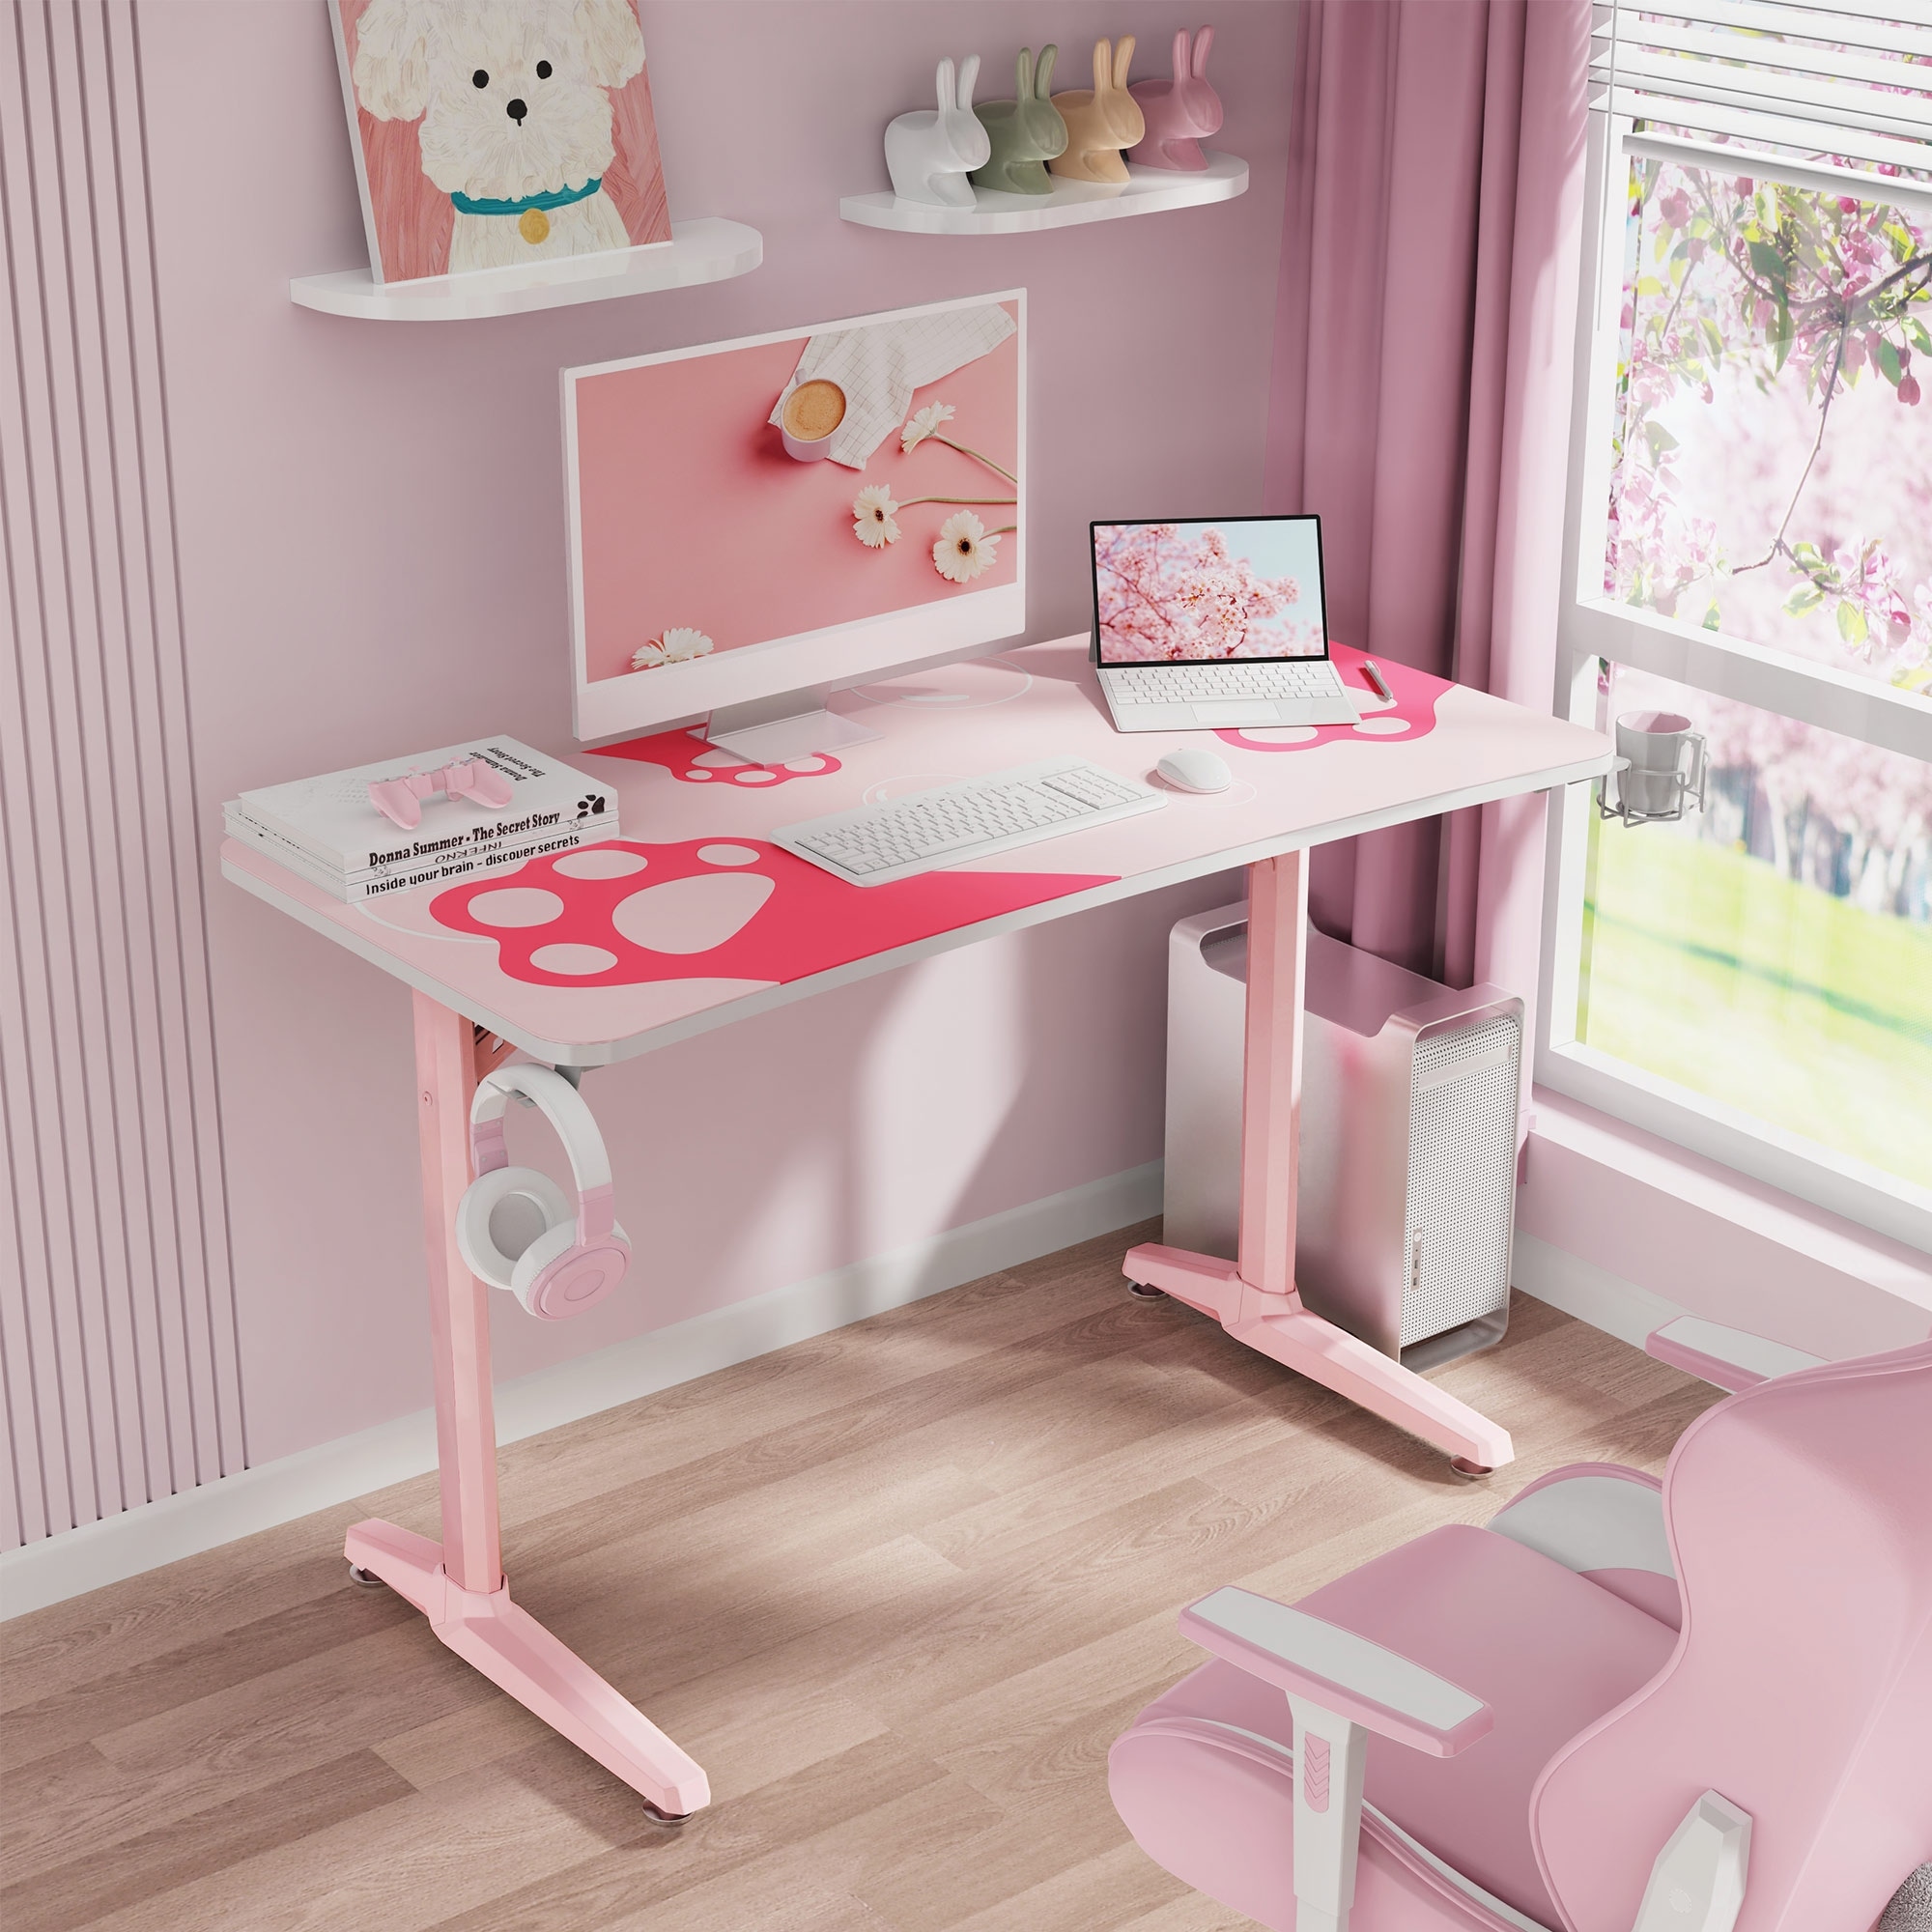 https://ak1.ostkcdn.com/images/products/is/images/direct/66f78f794401d75a860e006e352b493b59d2ab21/Eureka-47%22-Pink-Gaming-Desk-Home-Office-Computer-Writing-Desk.jpg